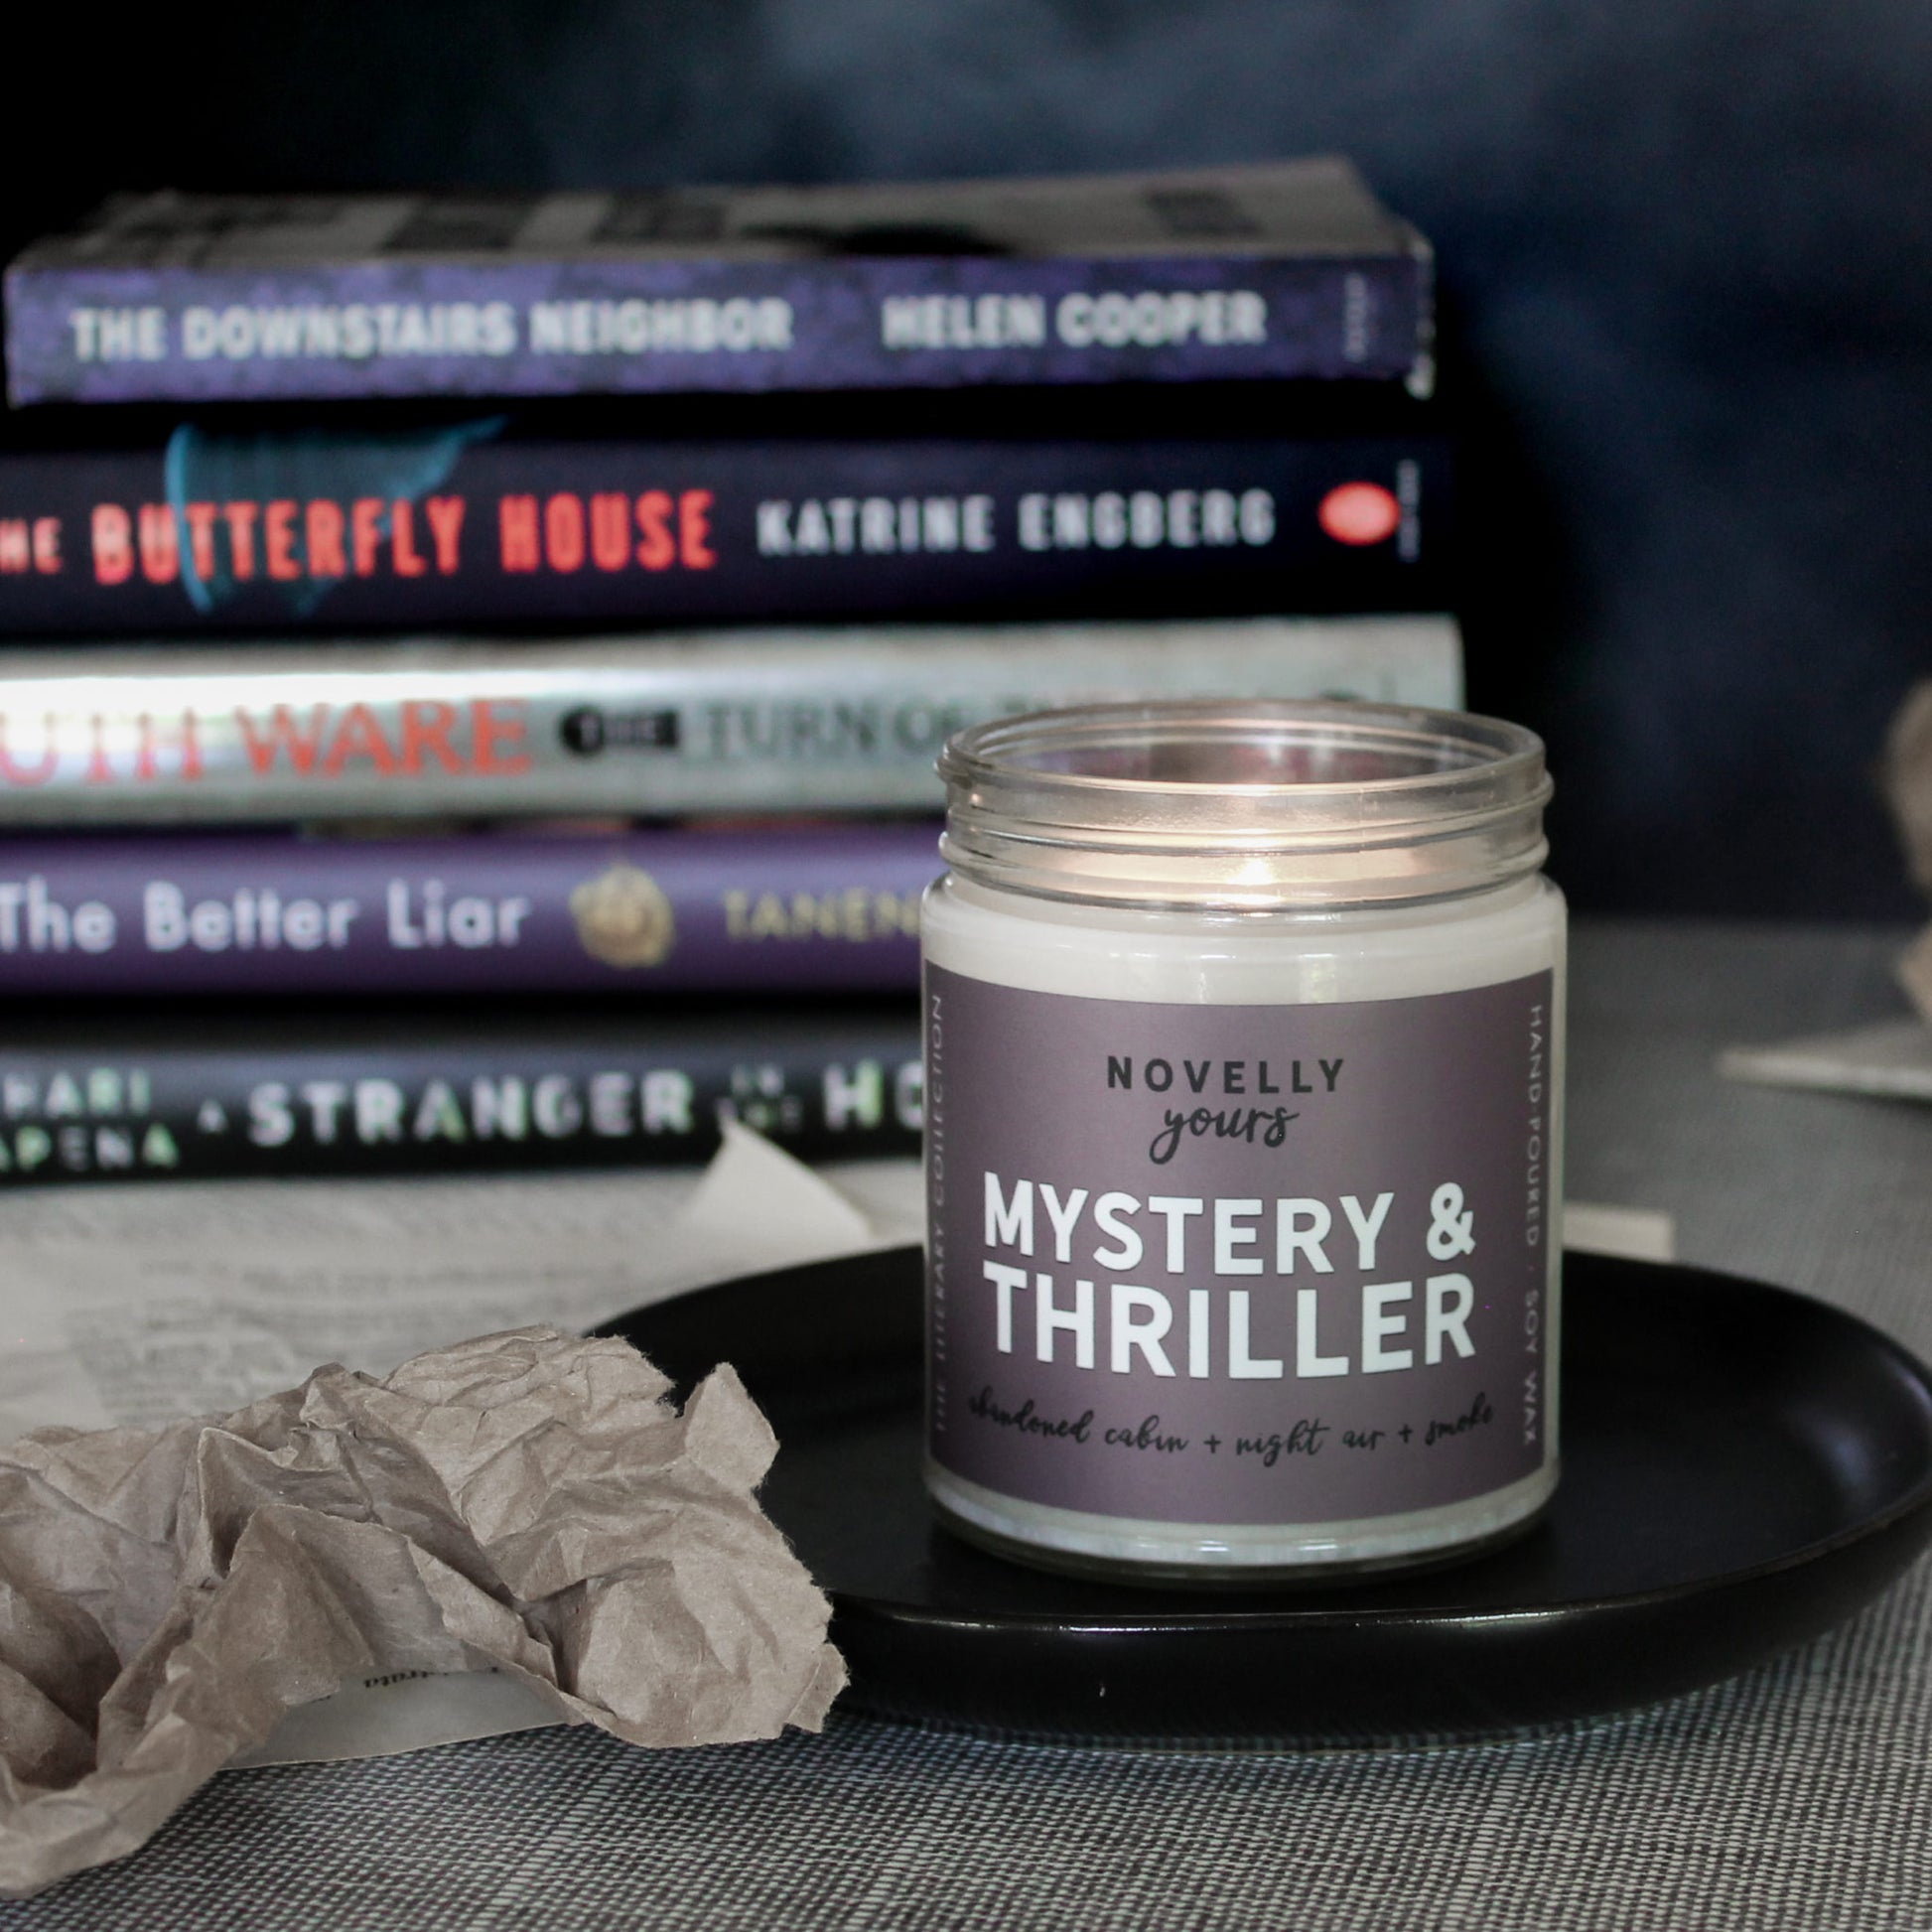 mystery & thriller scented soy wax candle with purple grey label and candle is lit. sits on black round tray with paper accents with thriller books in background